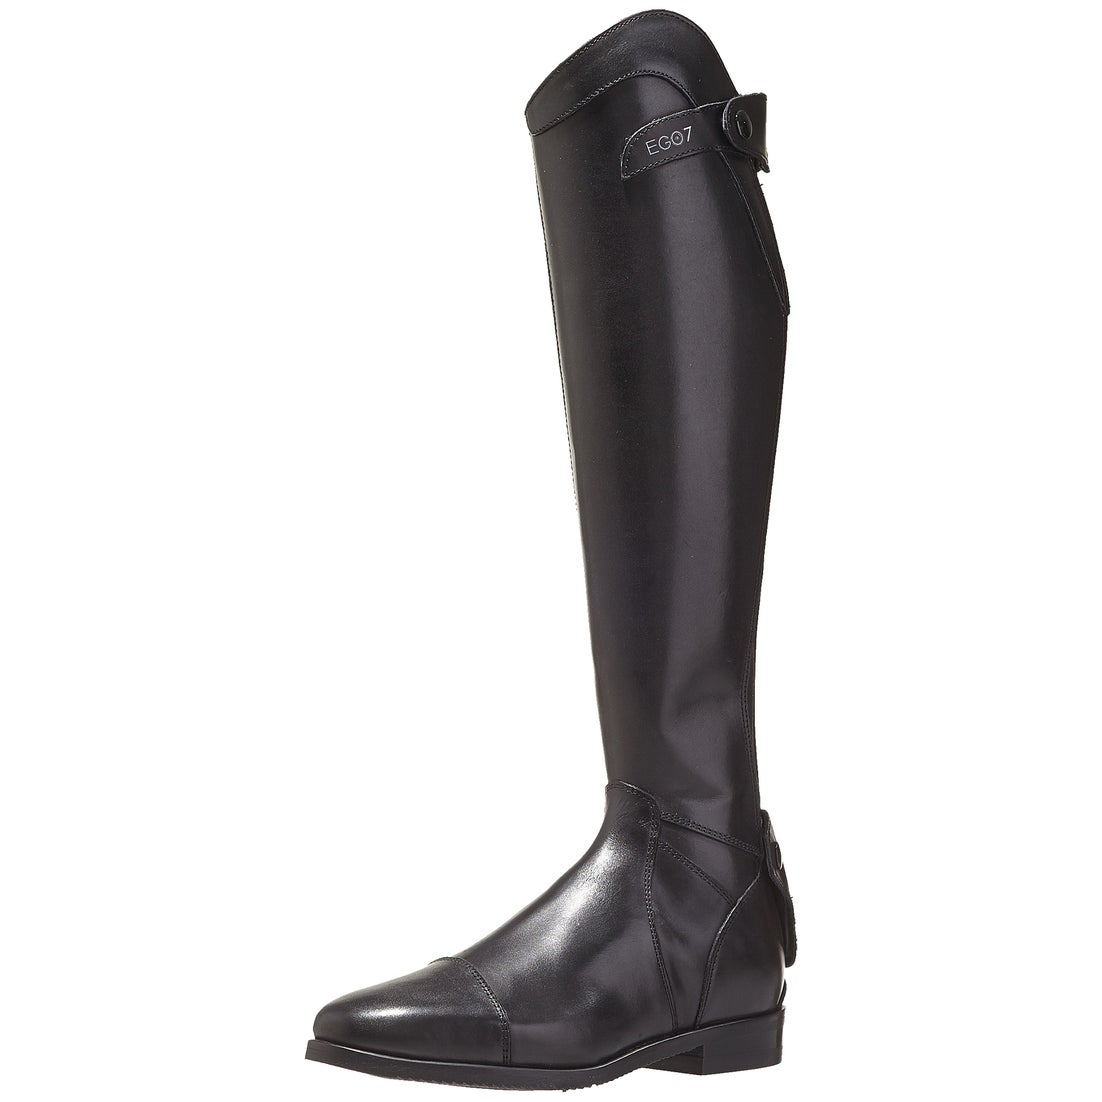 EGO7 Aries Tall Dress Boots | Riding Warehouse